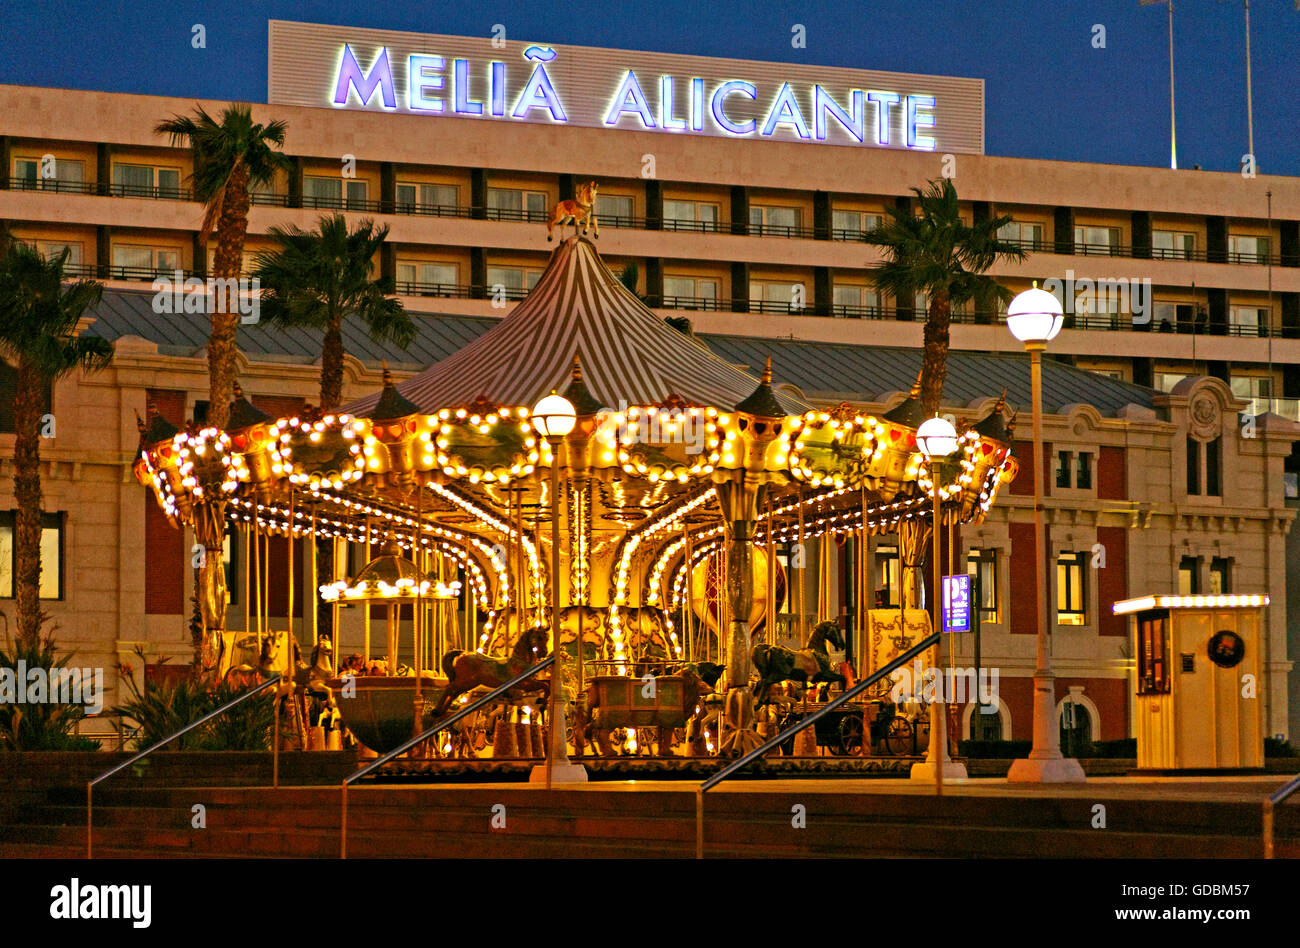 Melia alicante hotel hi-res stock photography and images - Alamy